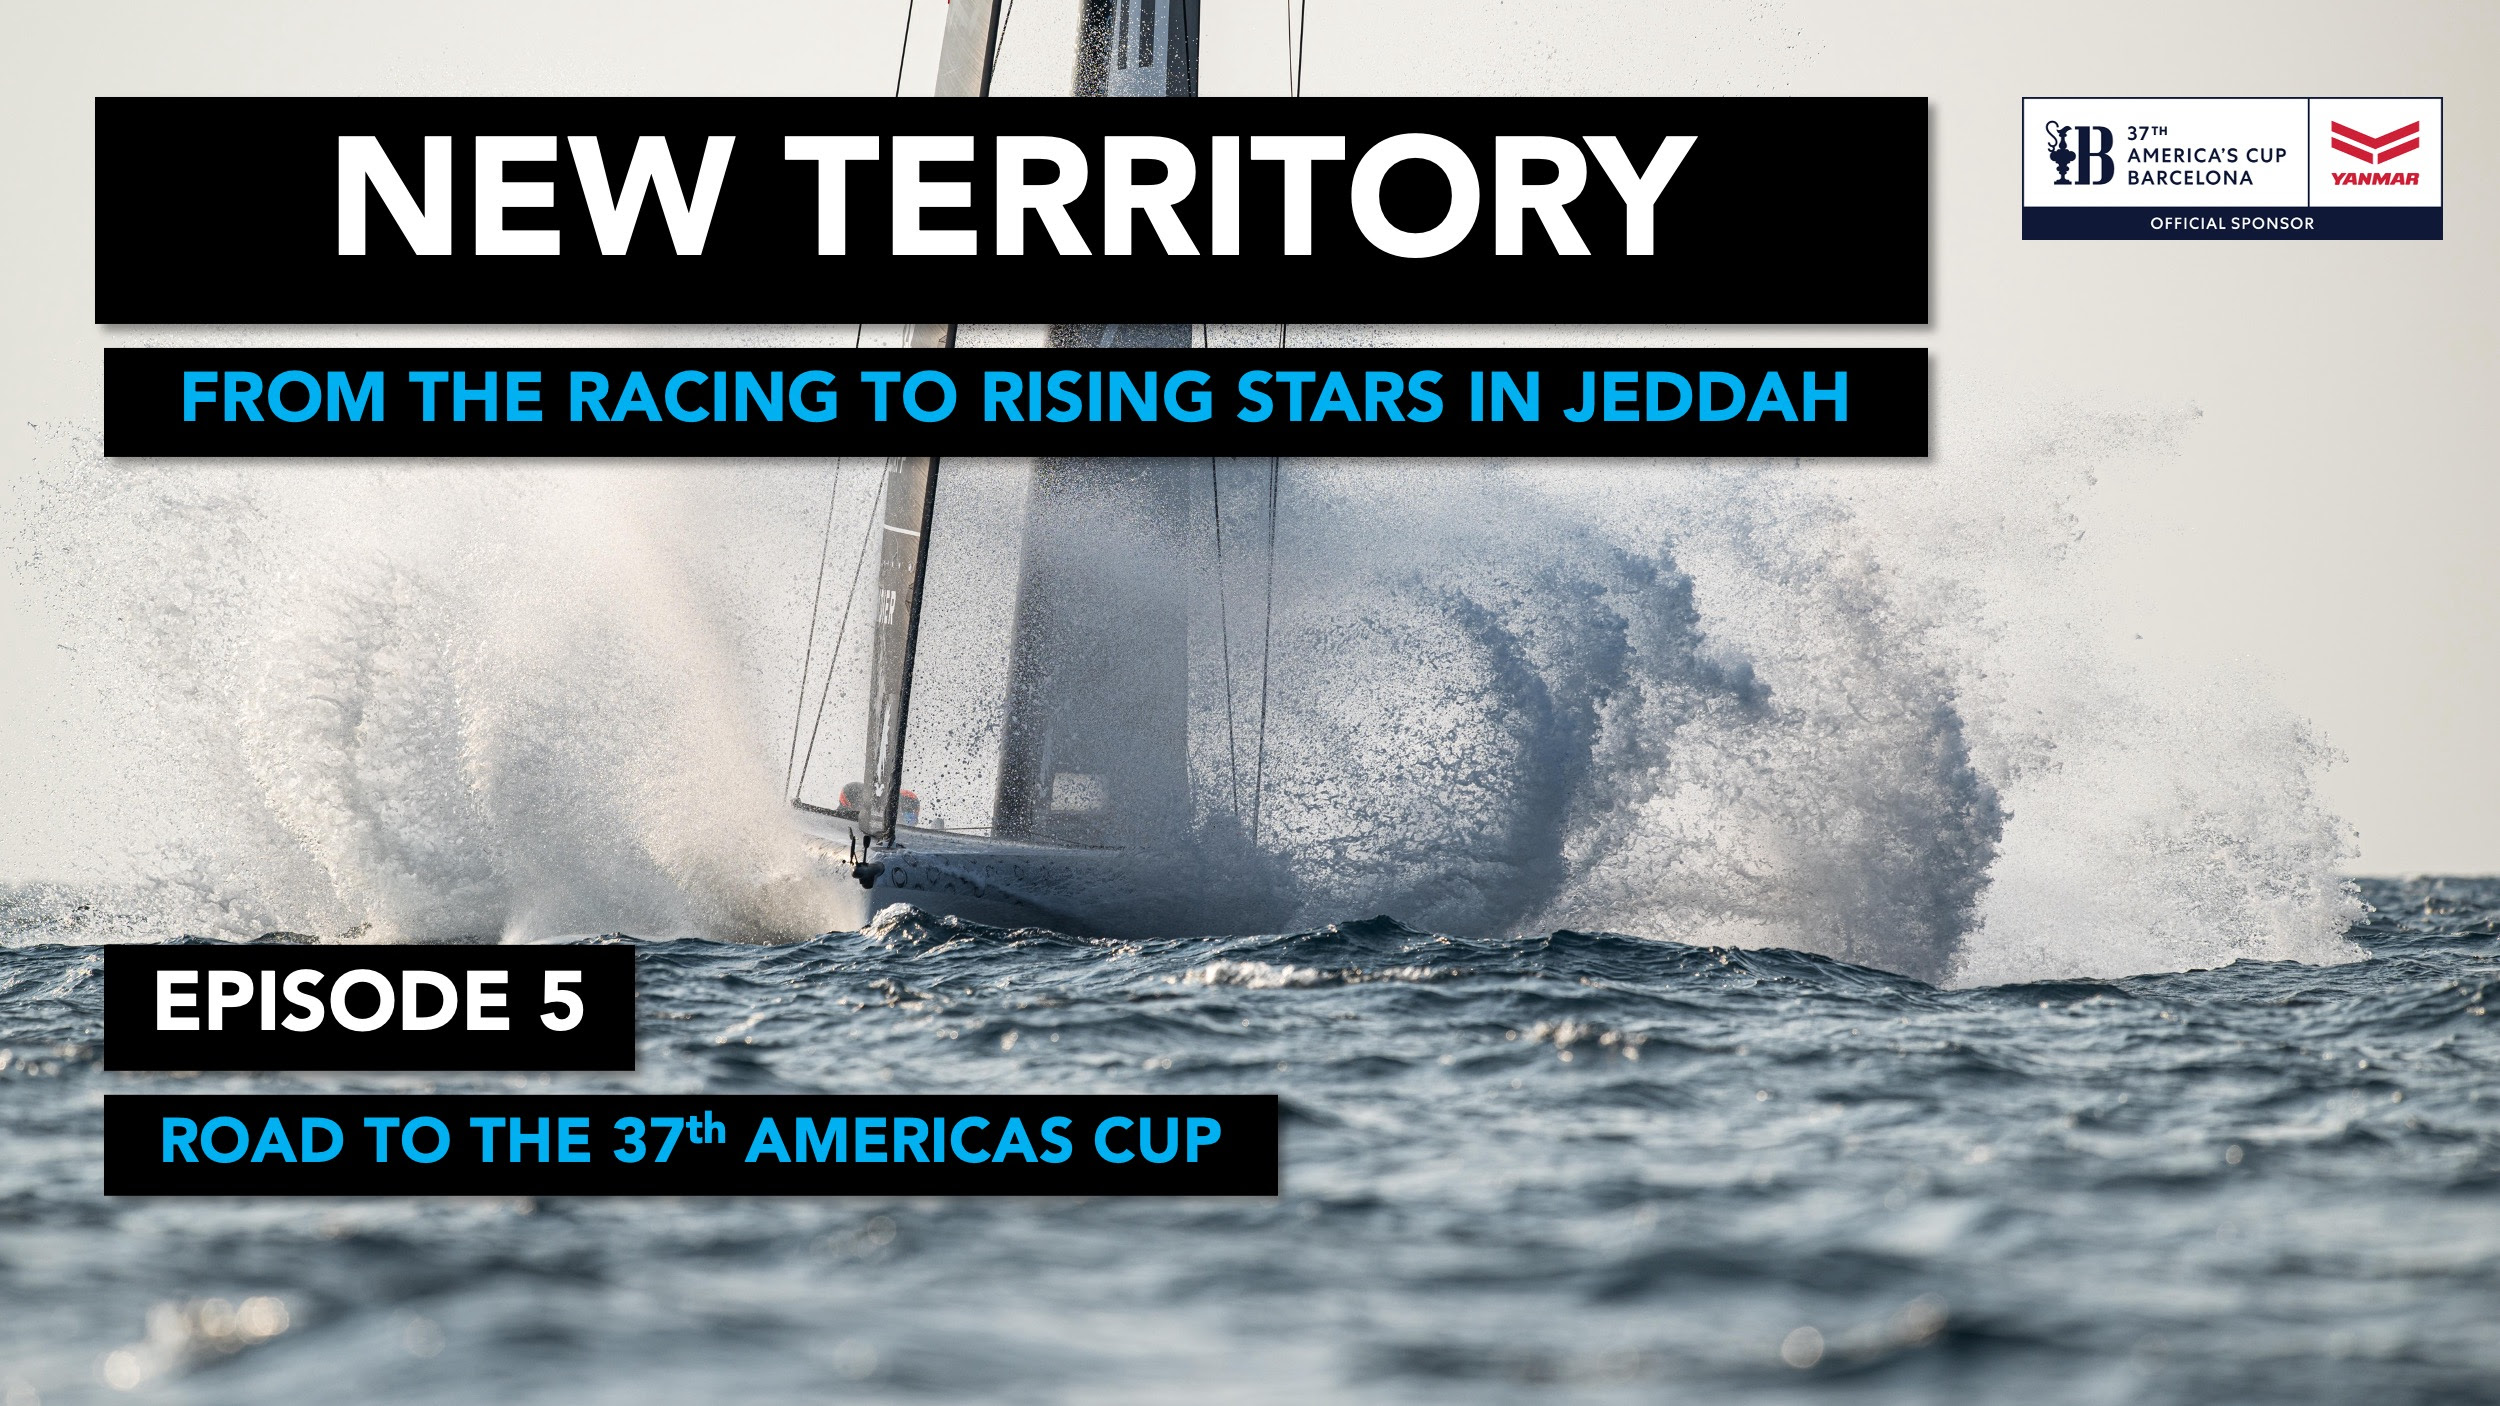 New territory for the America's Cup teams